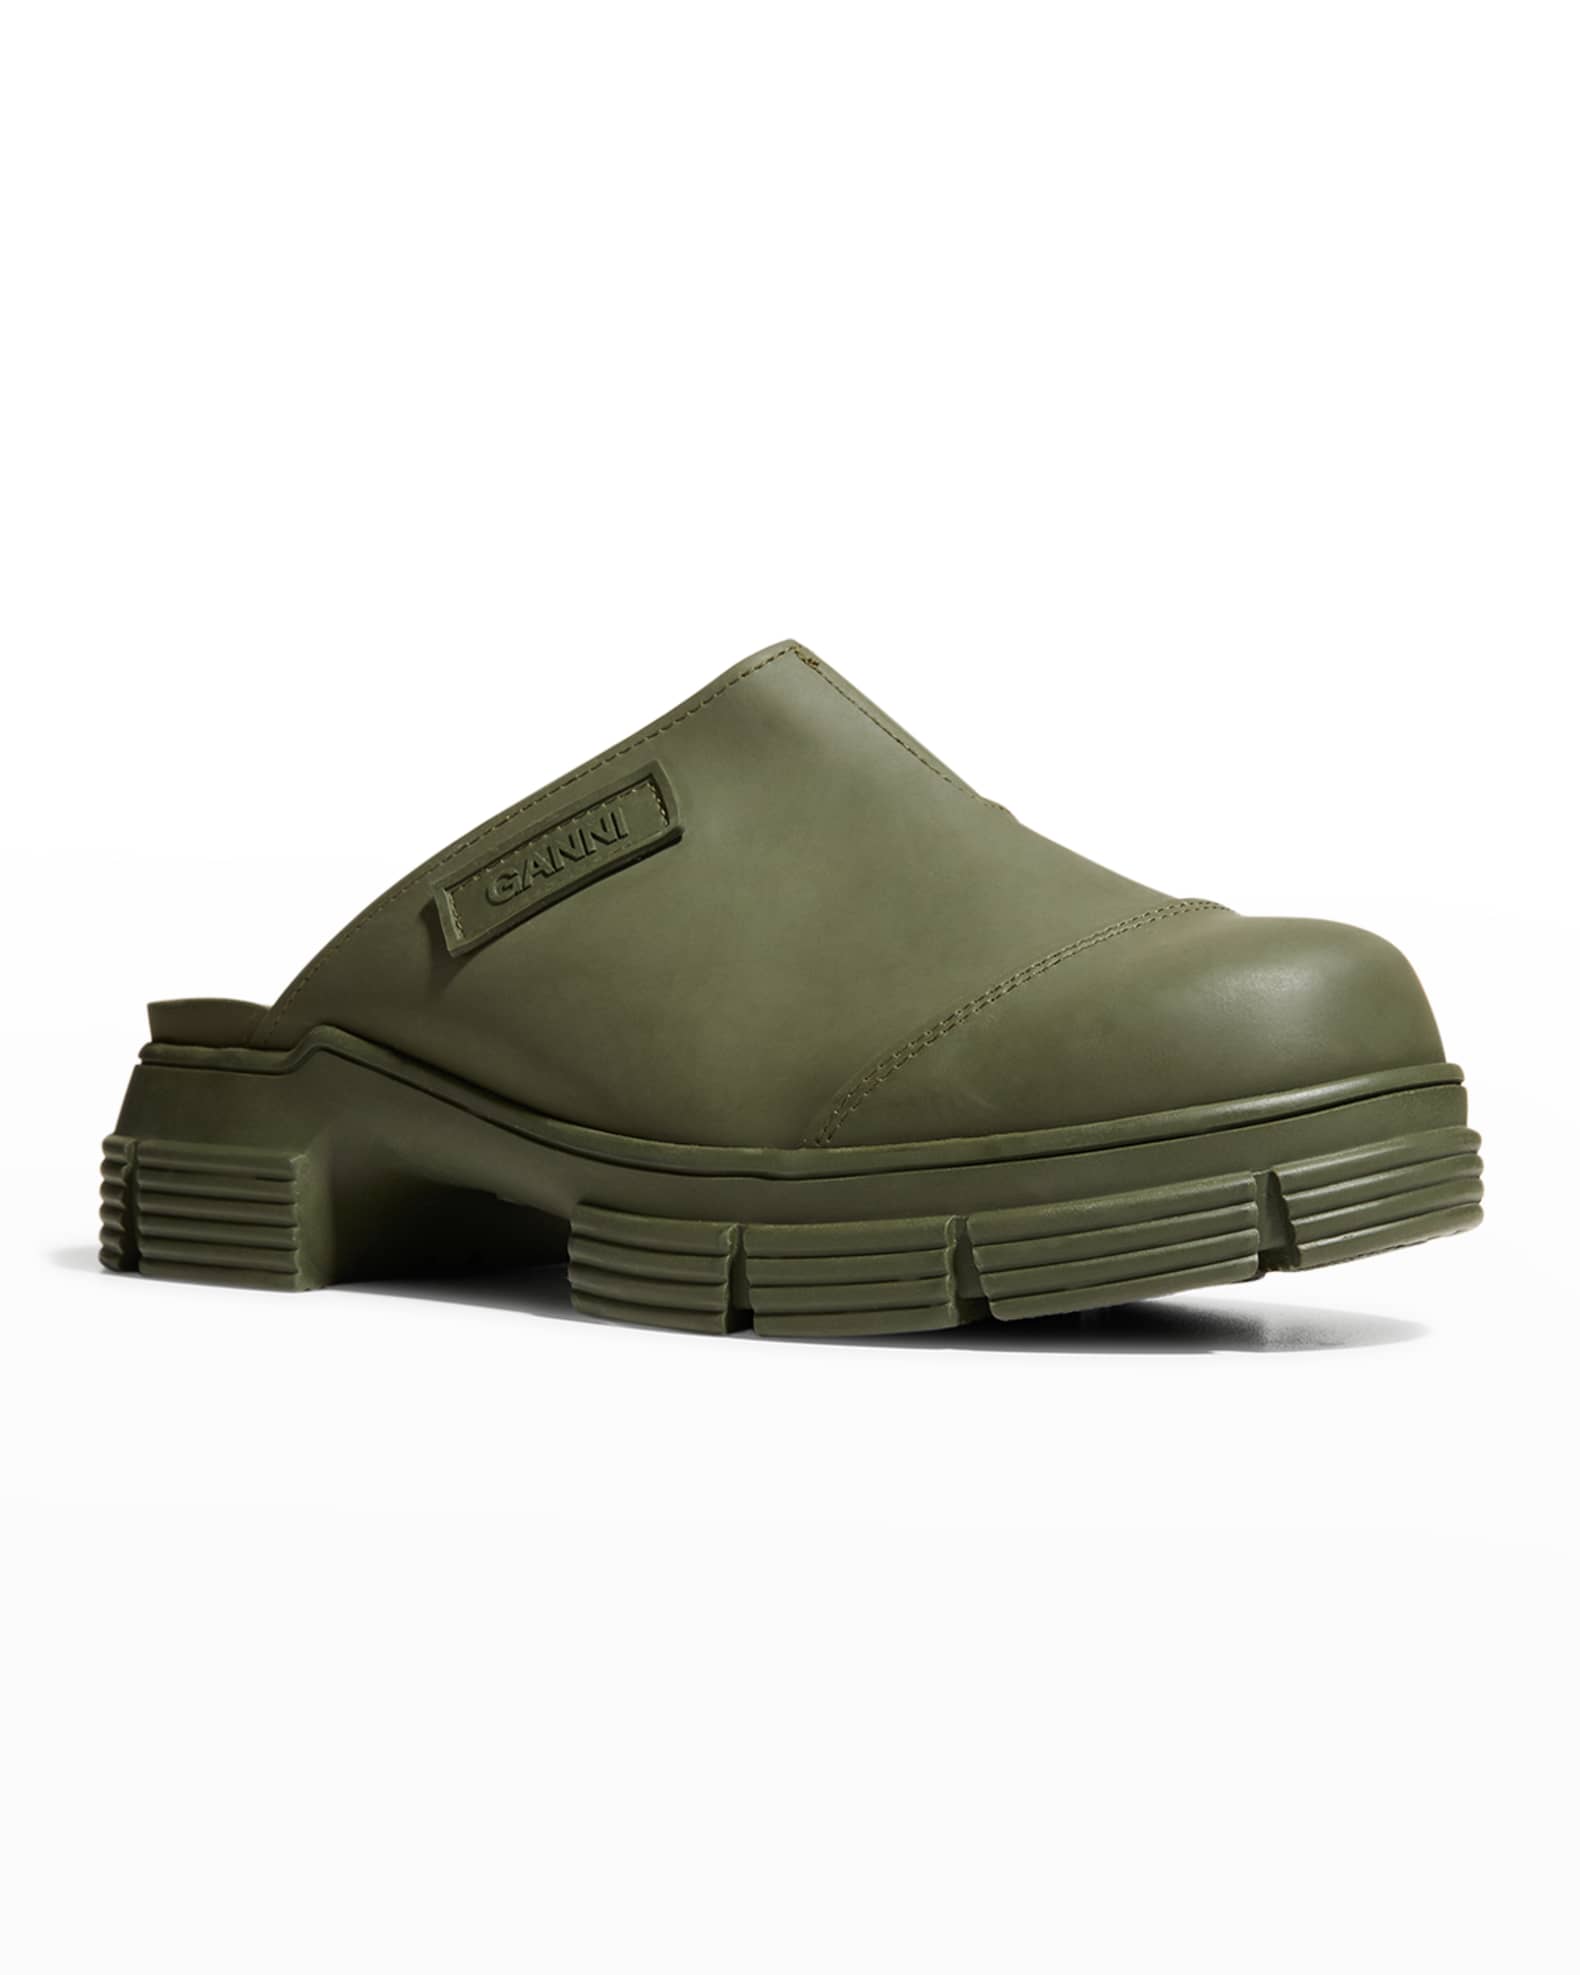 Ganni Lug-Sole Recycled Rubber Clogs | Neiman Marcus